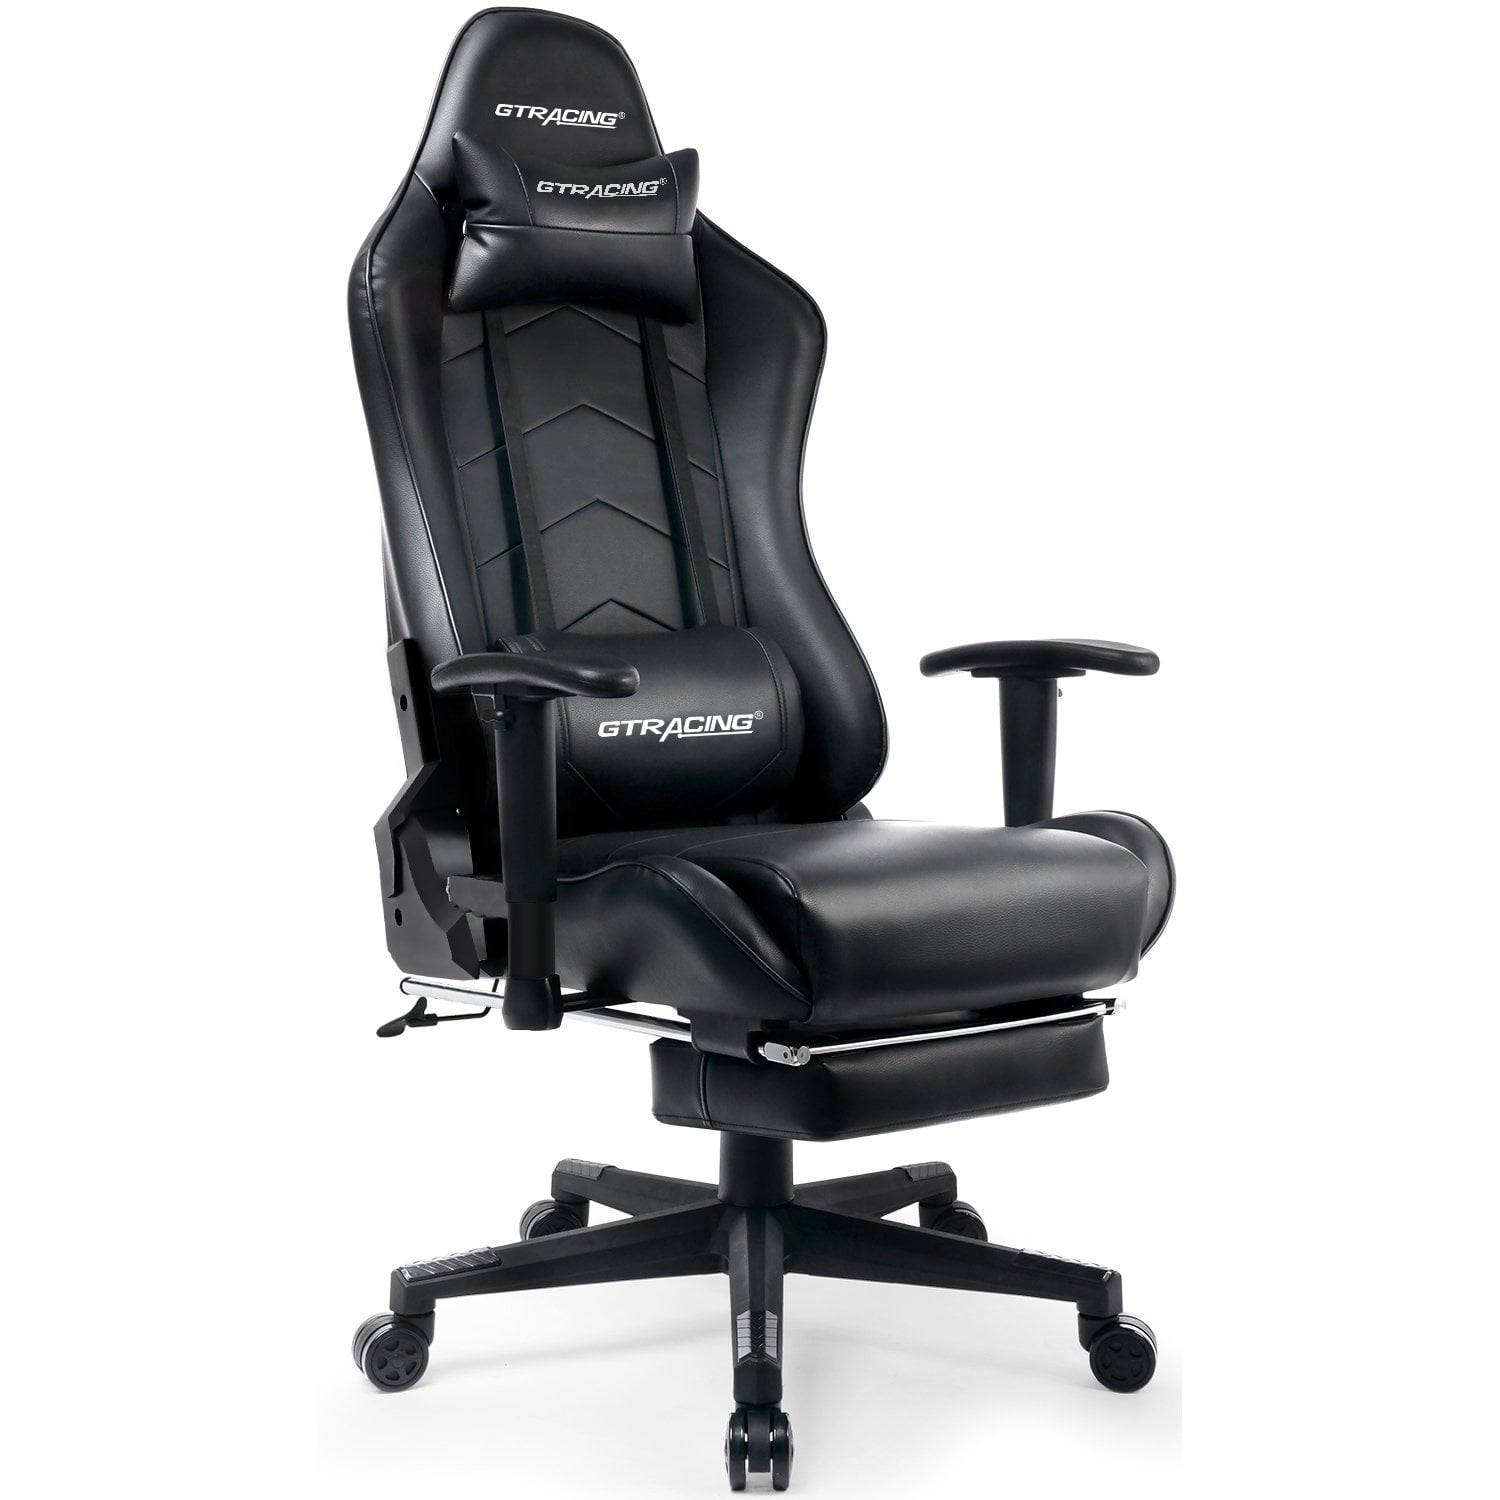 Gtracing Gaming Chair with Footrest Ergonomic Reclining Leather Chair